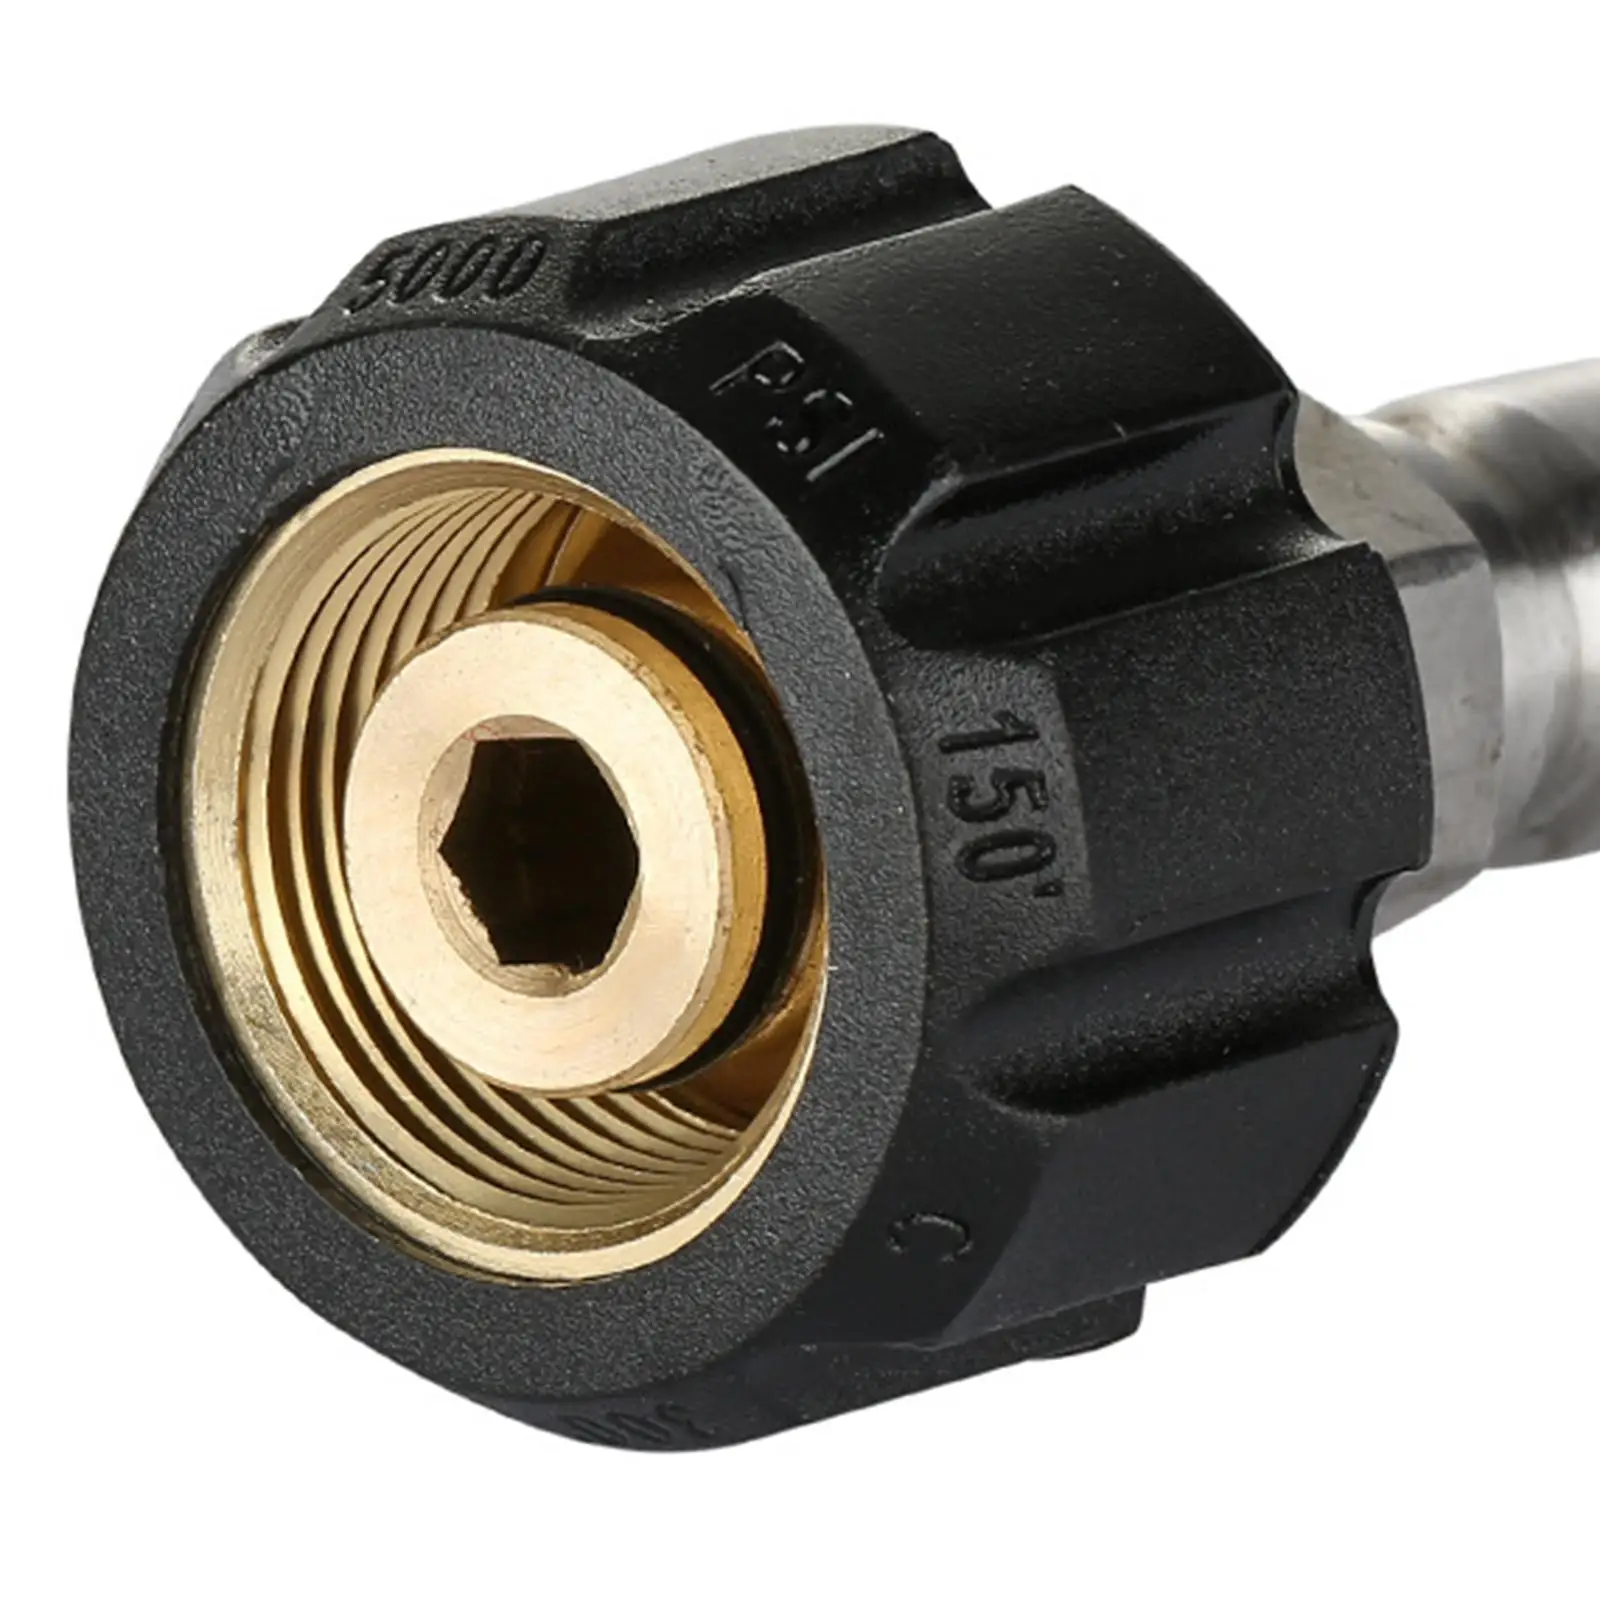 

Pressure Washer Adapter Fittings Metric M22 14mm Male Thread Power Washers Sturdy Rated up to 5000PSI M22 to 1/4'' Quick Connect